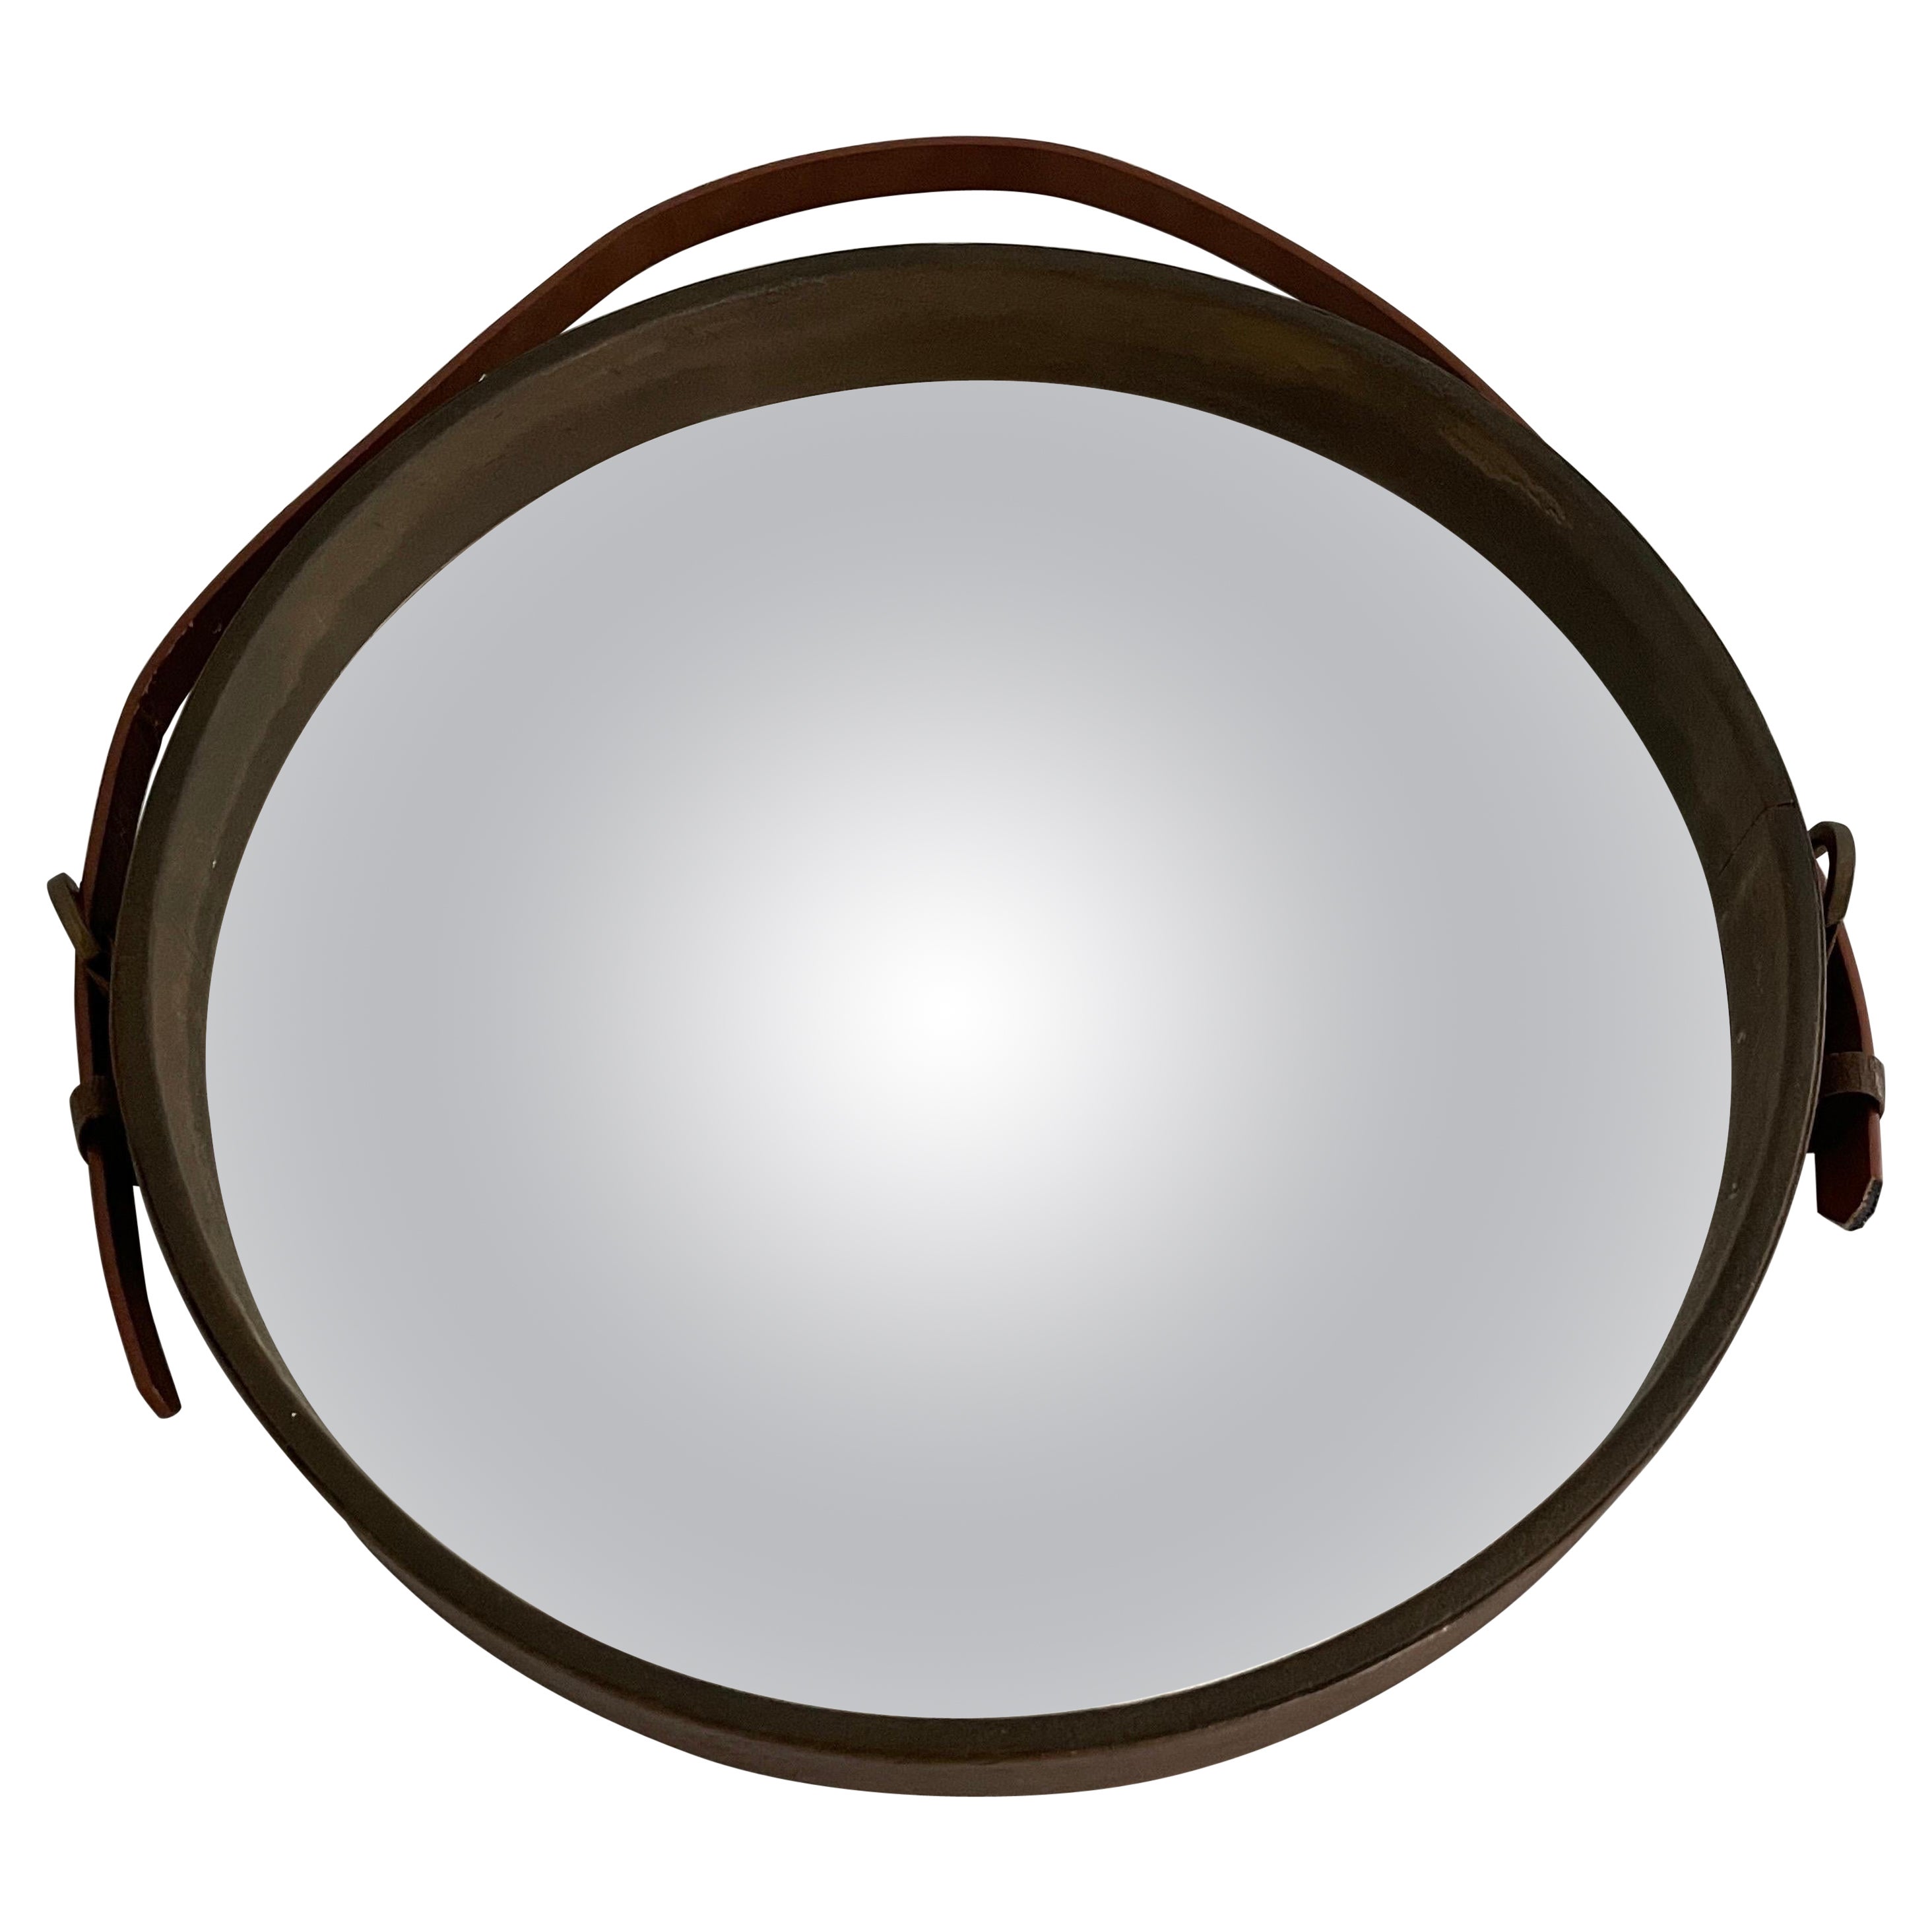 Round Leather Wall Mirror with Leather Strap, 1960s, Italy For Sale